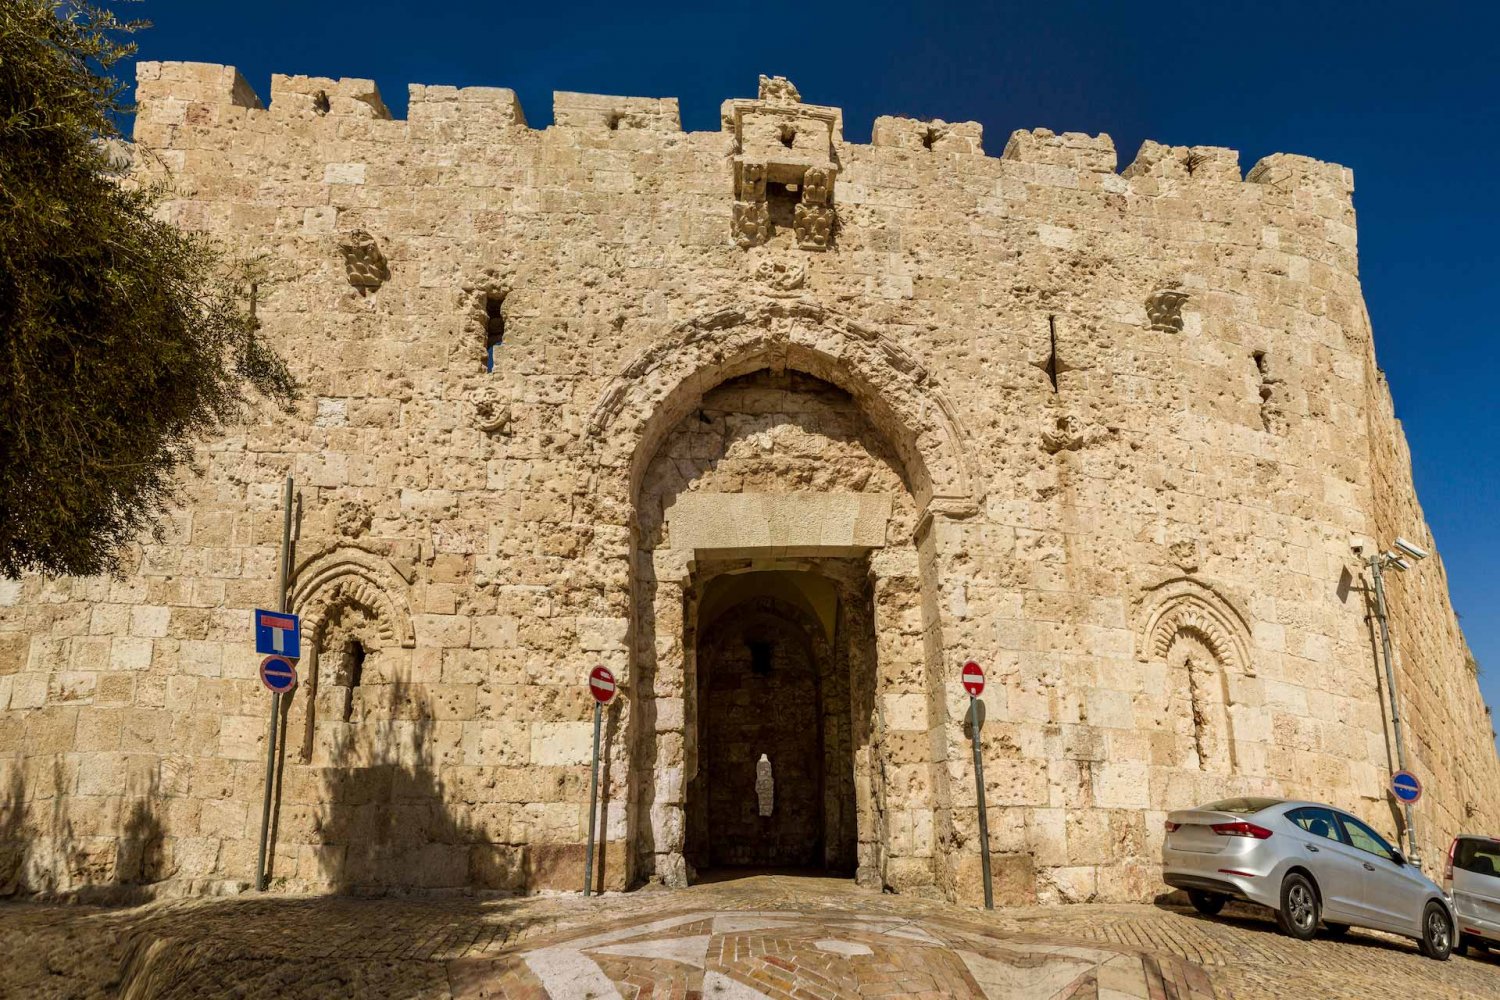 Zion Gate or Bab Haret al-Yahud, one of the gates to Jerusalem's Old City